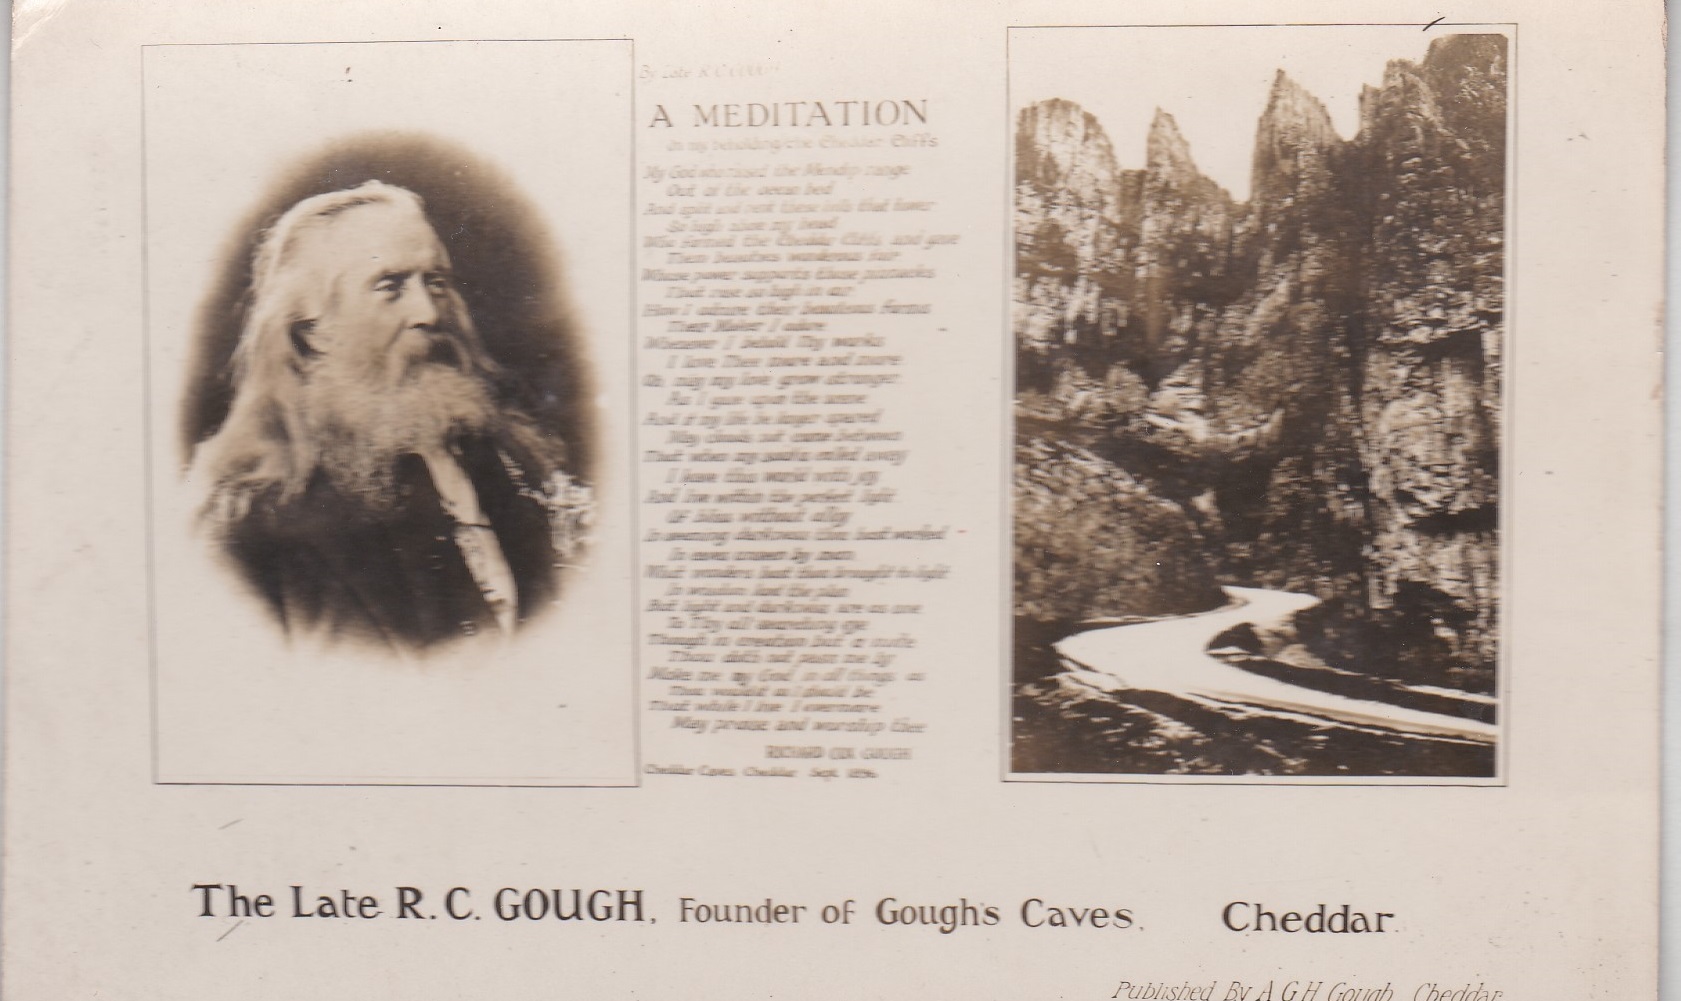 Postcards-Cheddar Caves-The Late R.C Gough portrait and Meditation used 1934